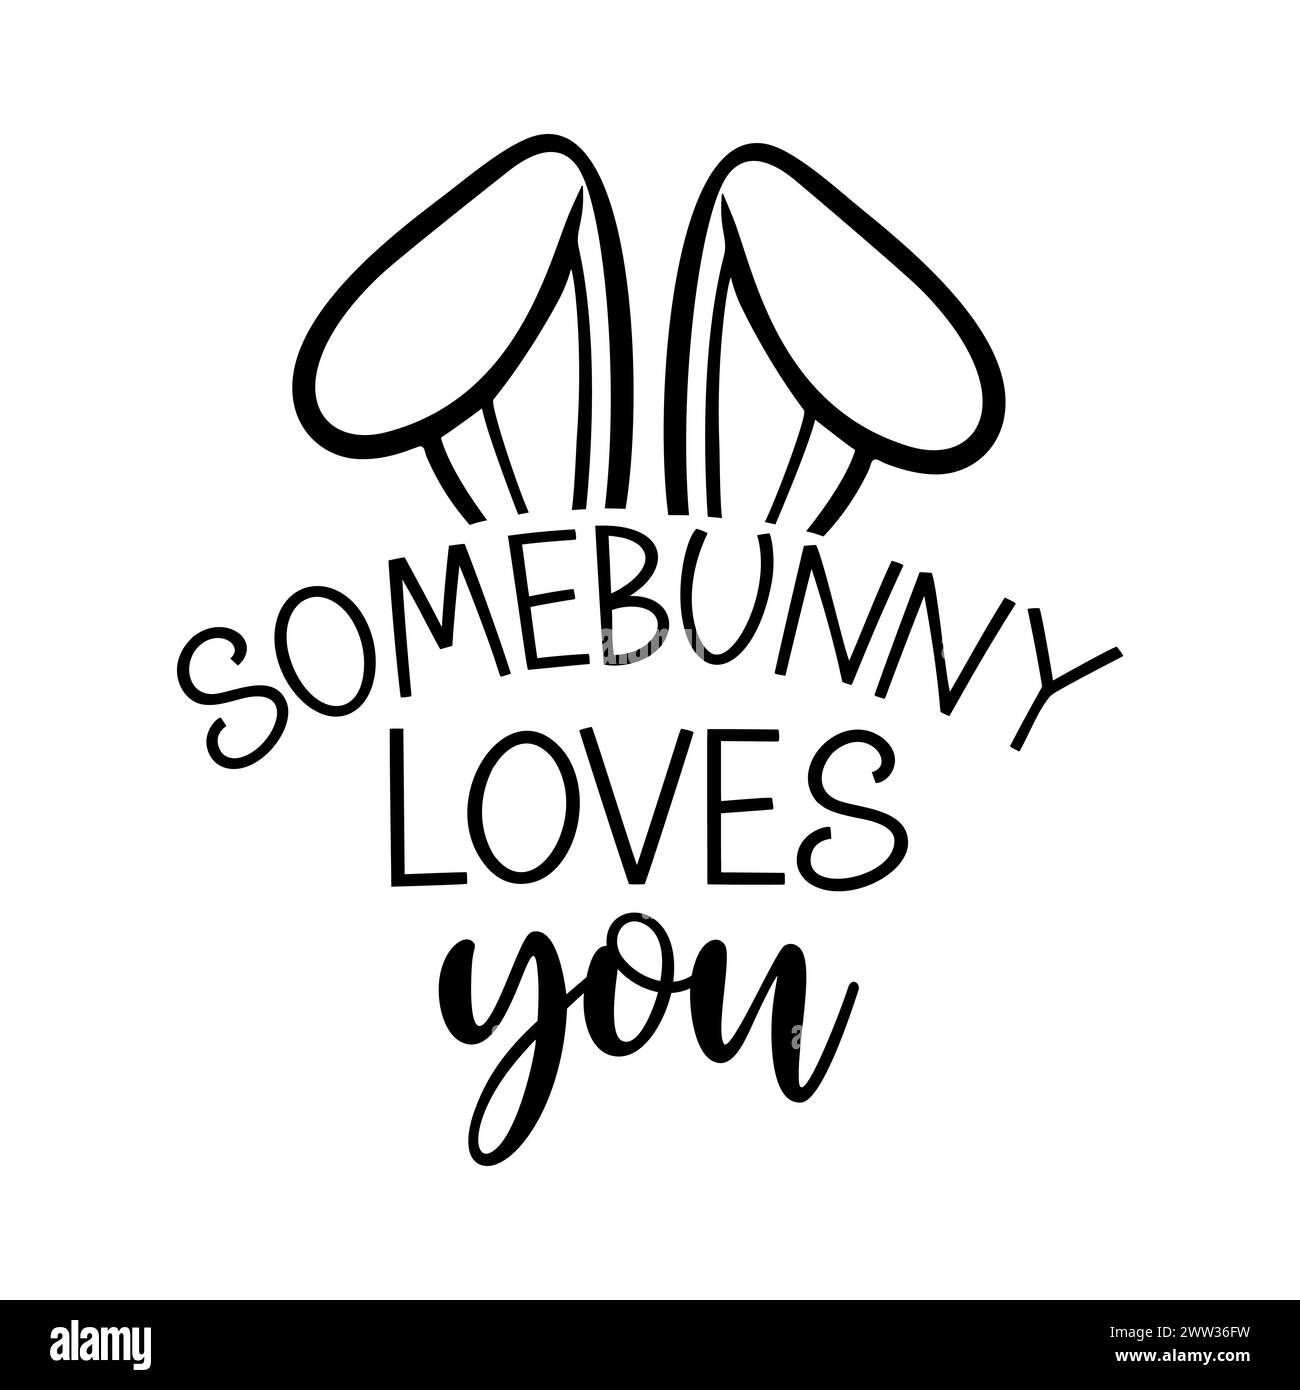 Somebunny loves you. Easter vector quote. Stock Vector